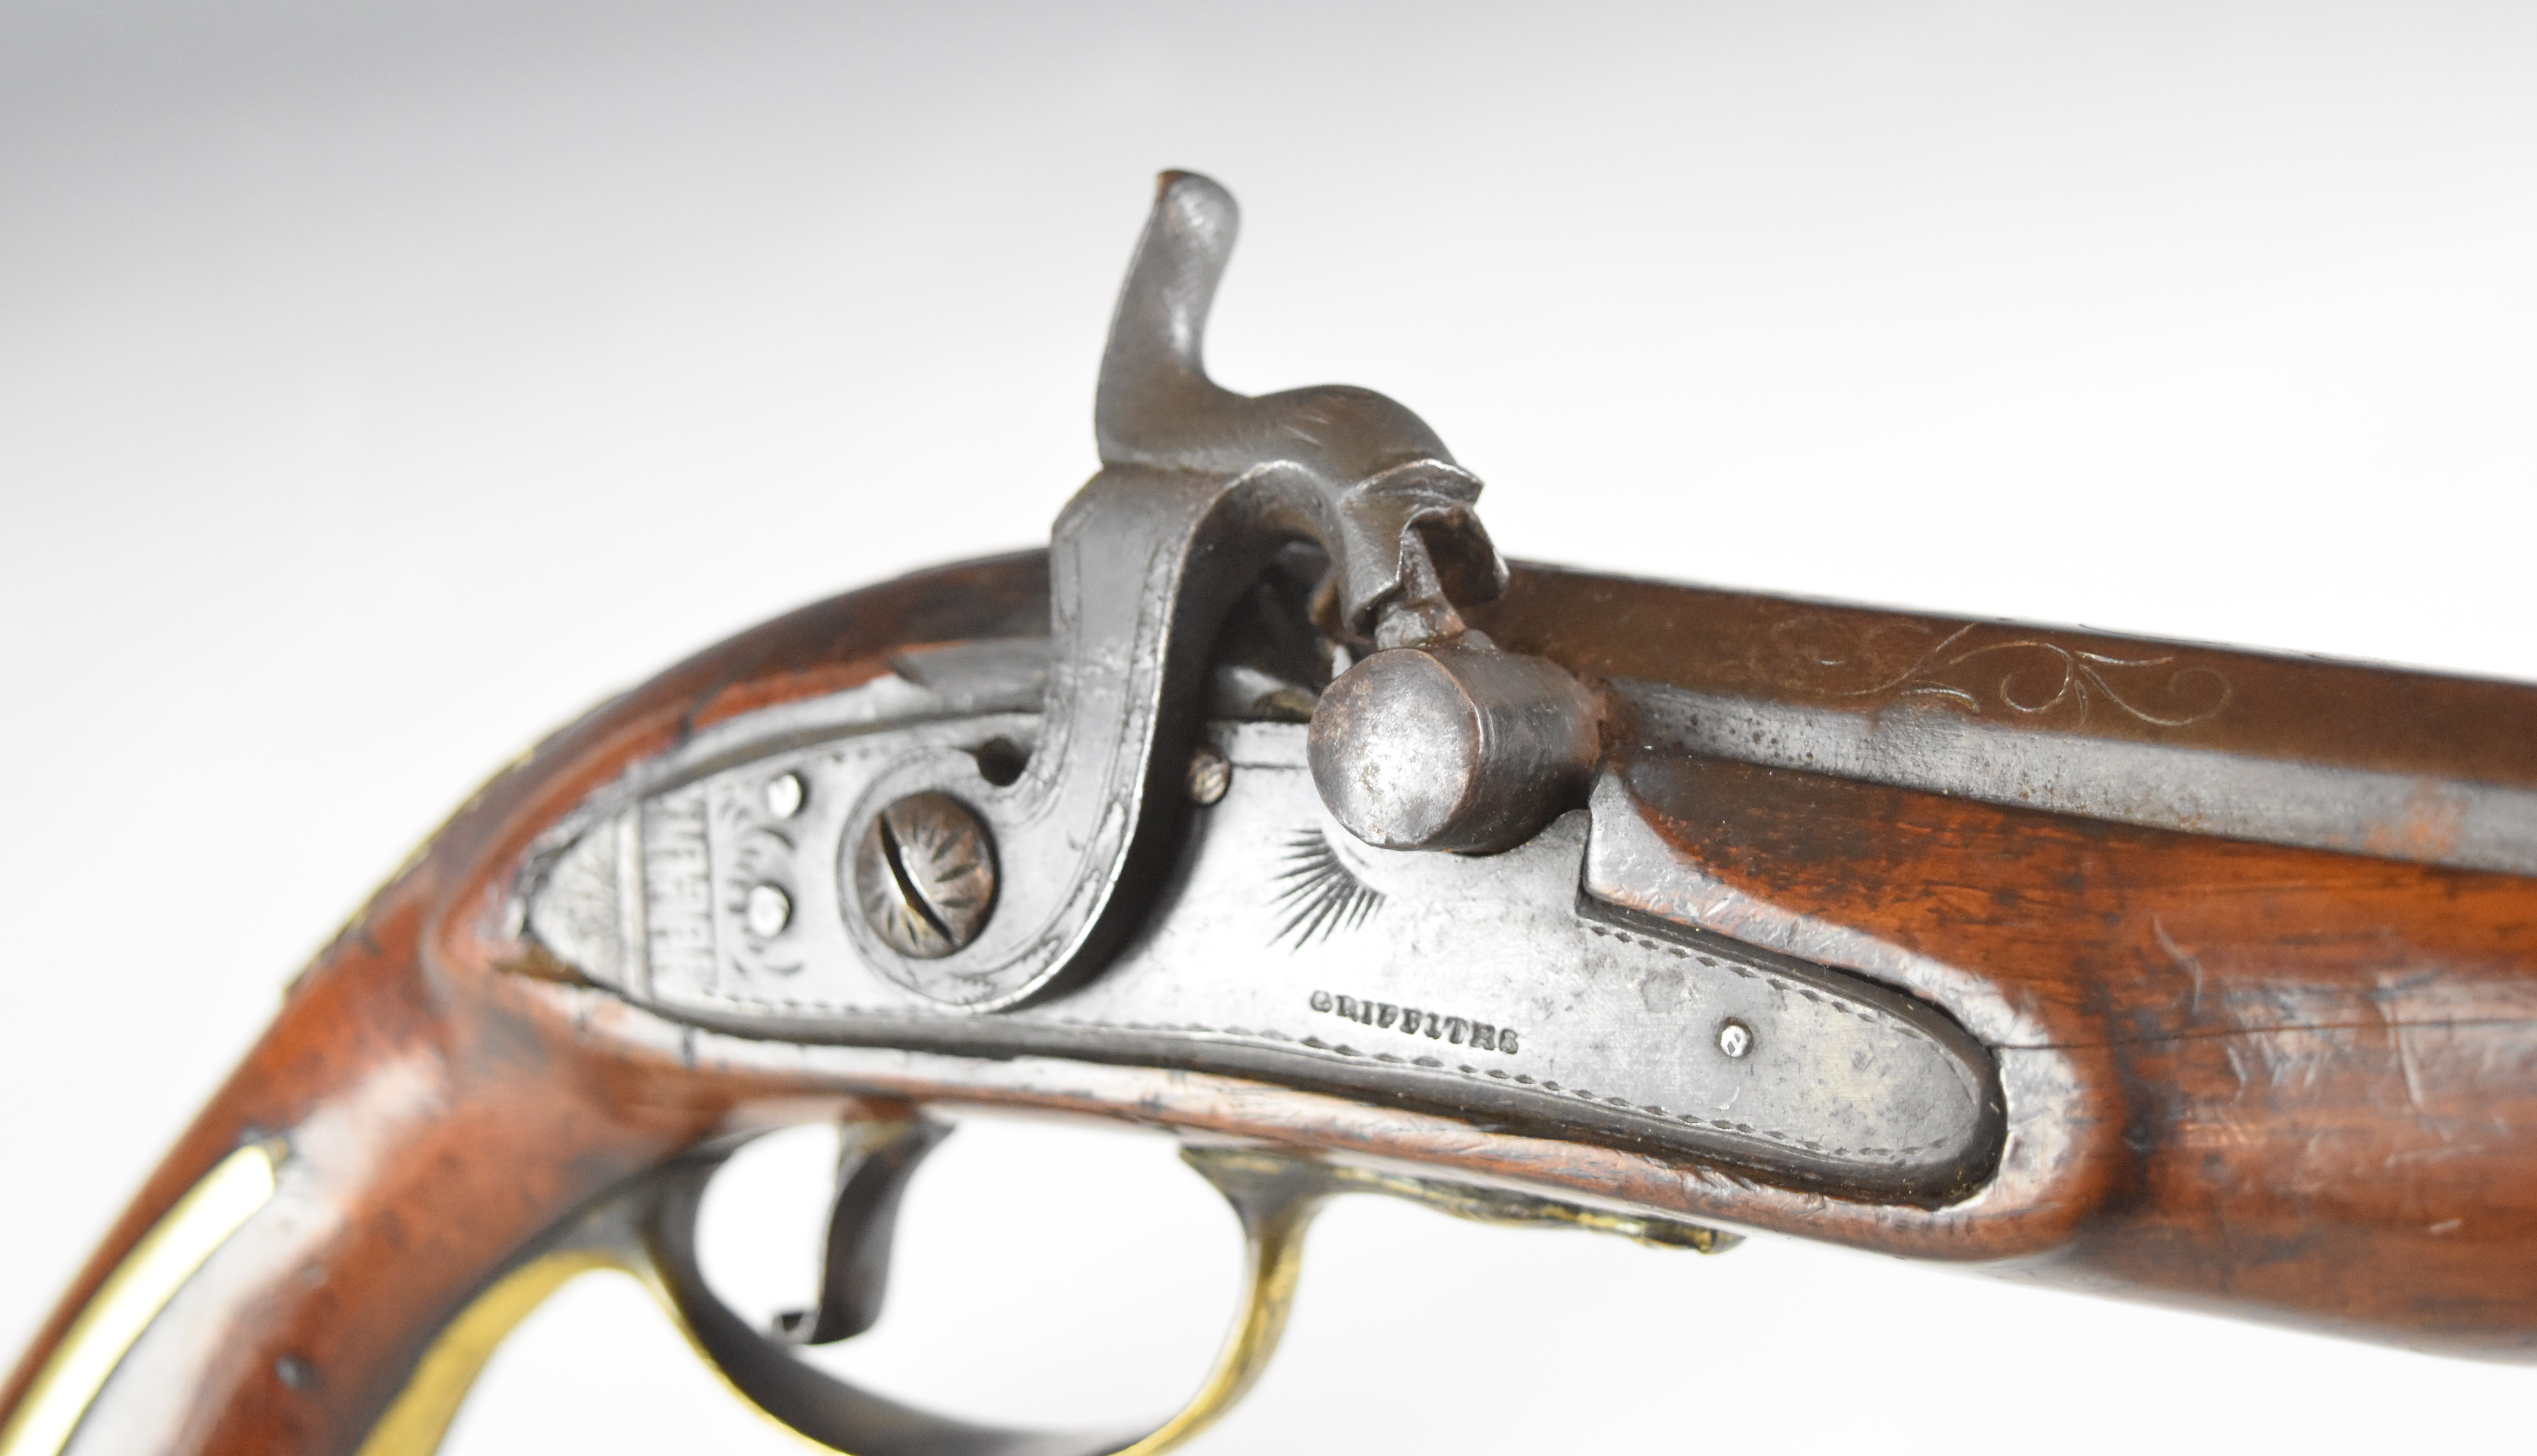 Griffiths percussion converted from flintlock hammer action pistol with named and engraved lock, - Image 9 of 13